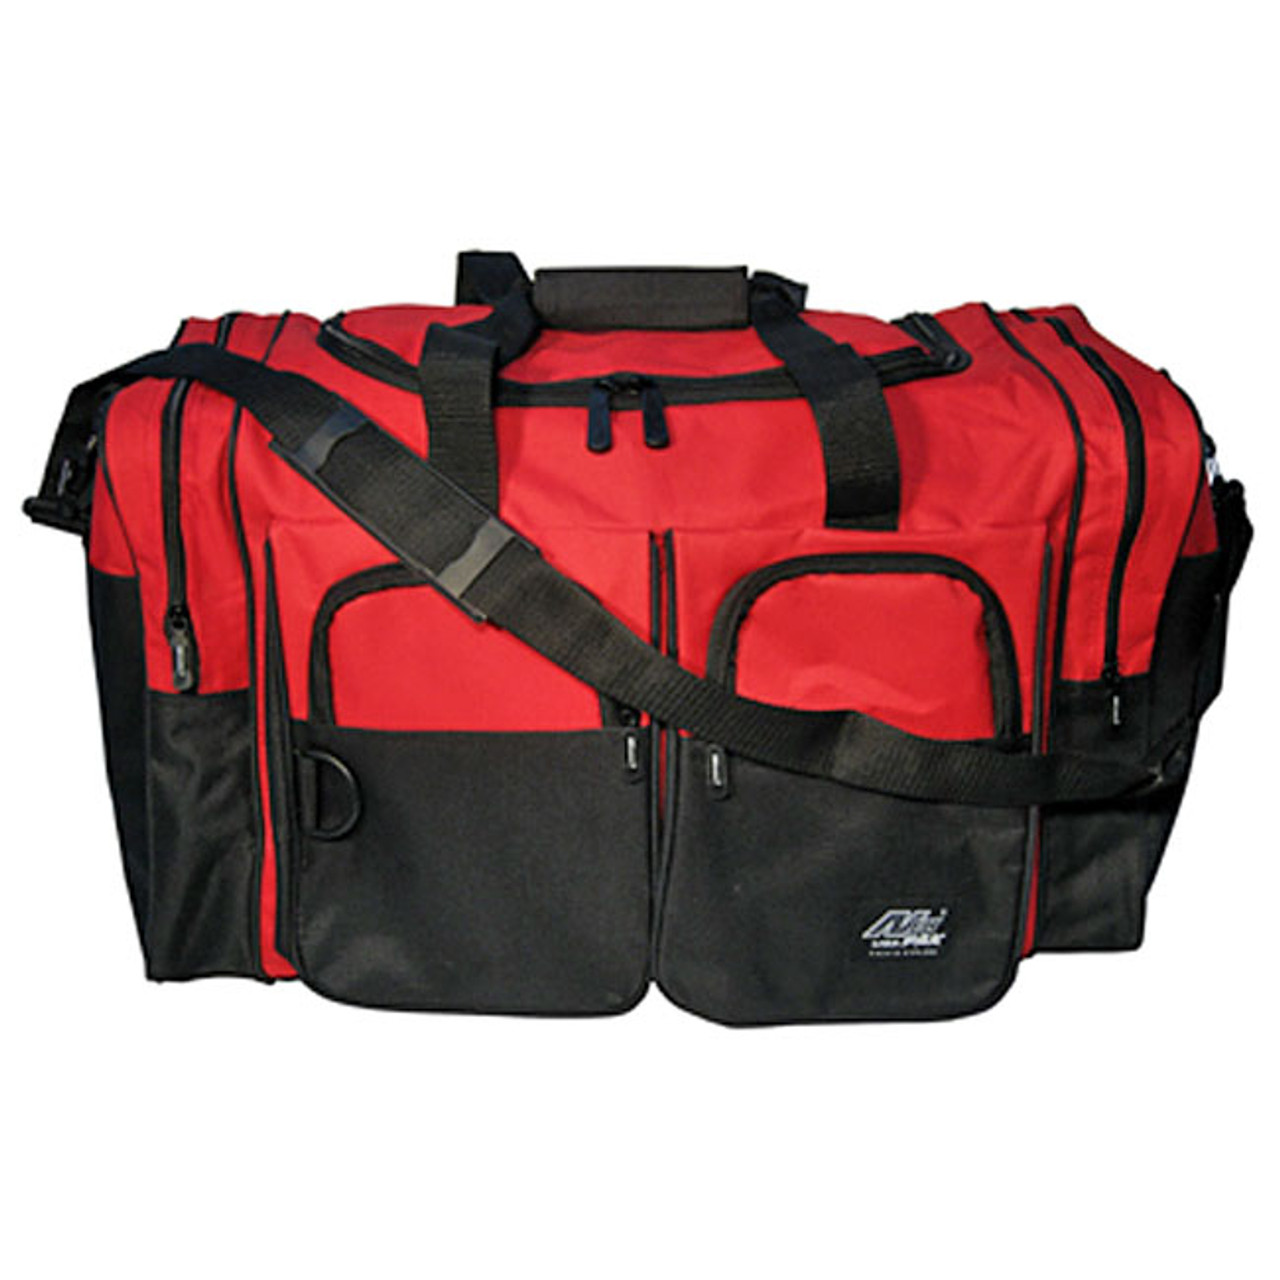 X Factor Rolling Duffel Bag Red Large 28 Inch with Multi-Pockets